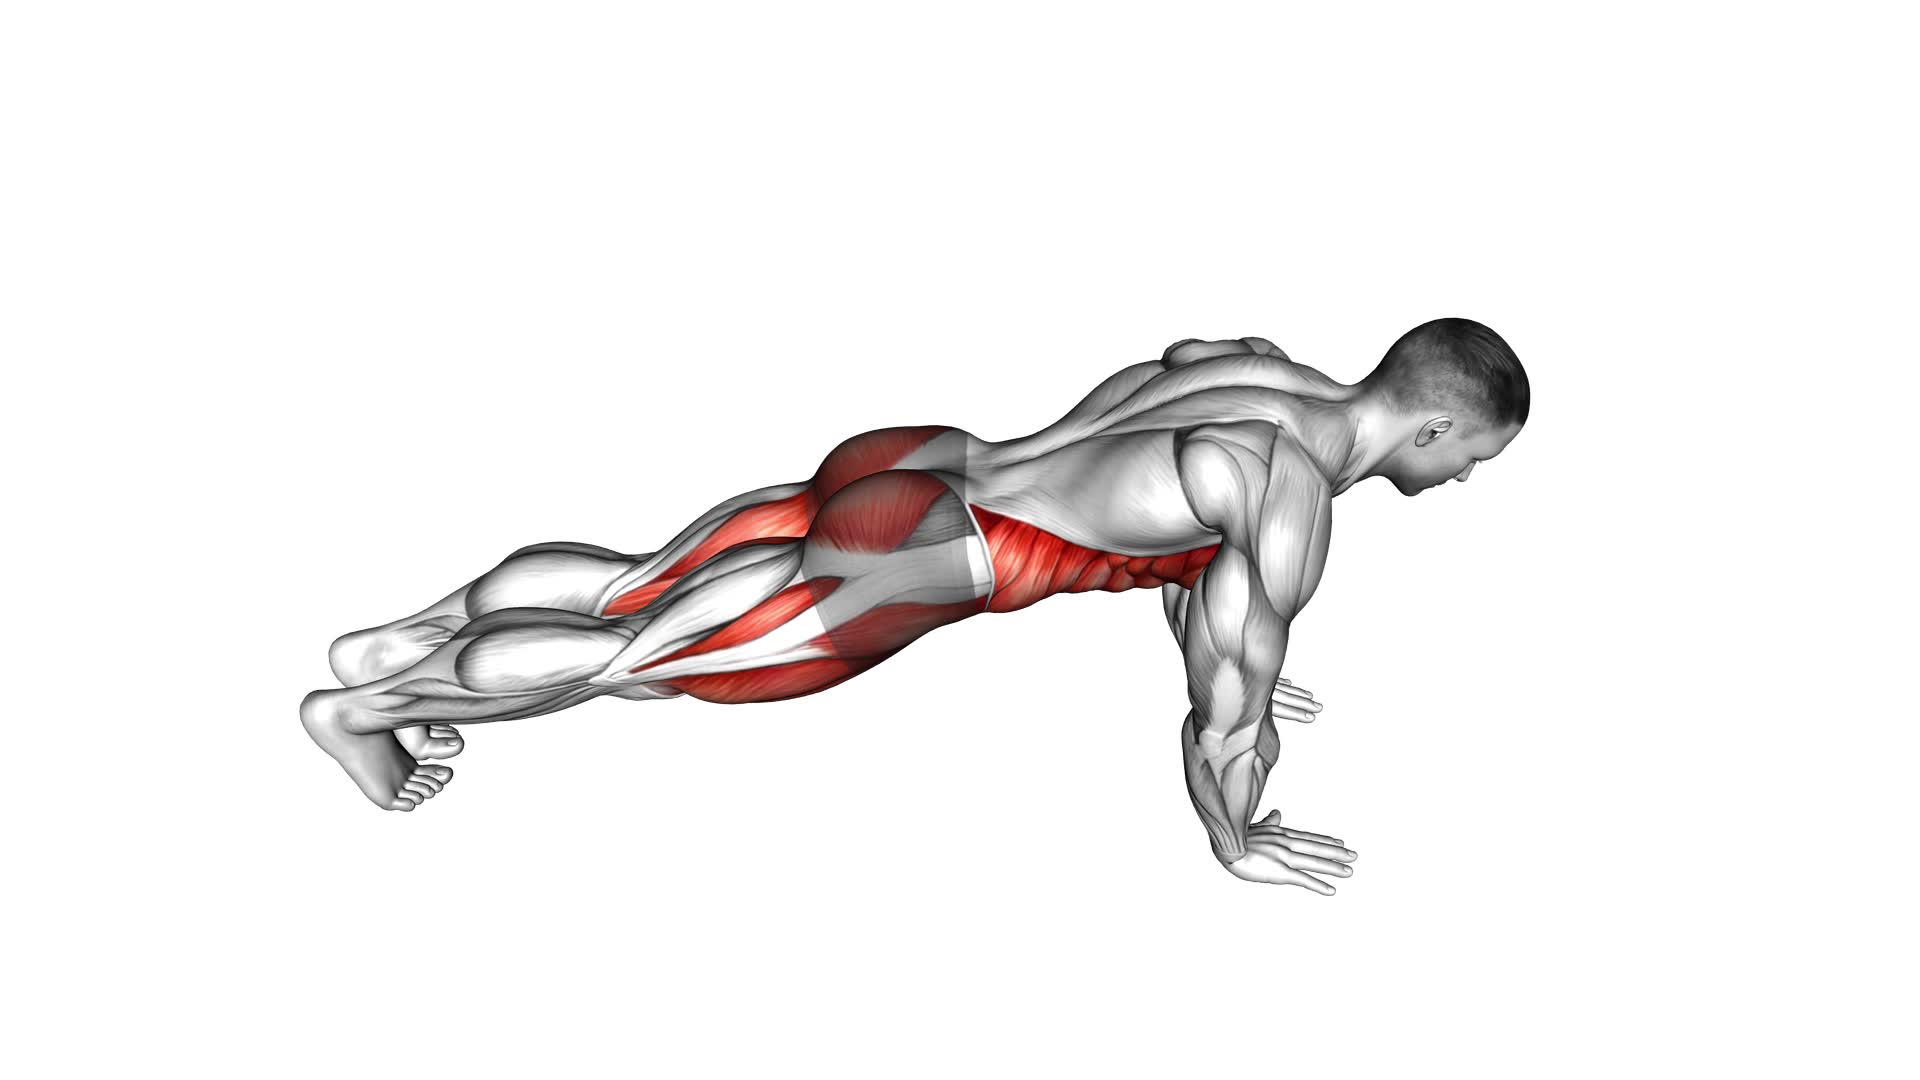 Knee To Elbow Touch Front Plank - Video Exercise Guide & Tips